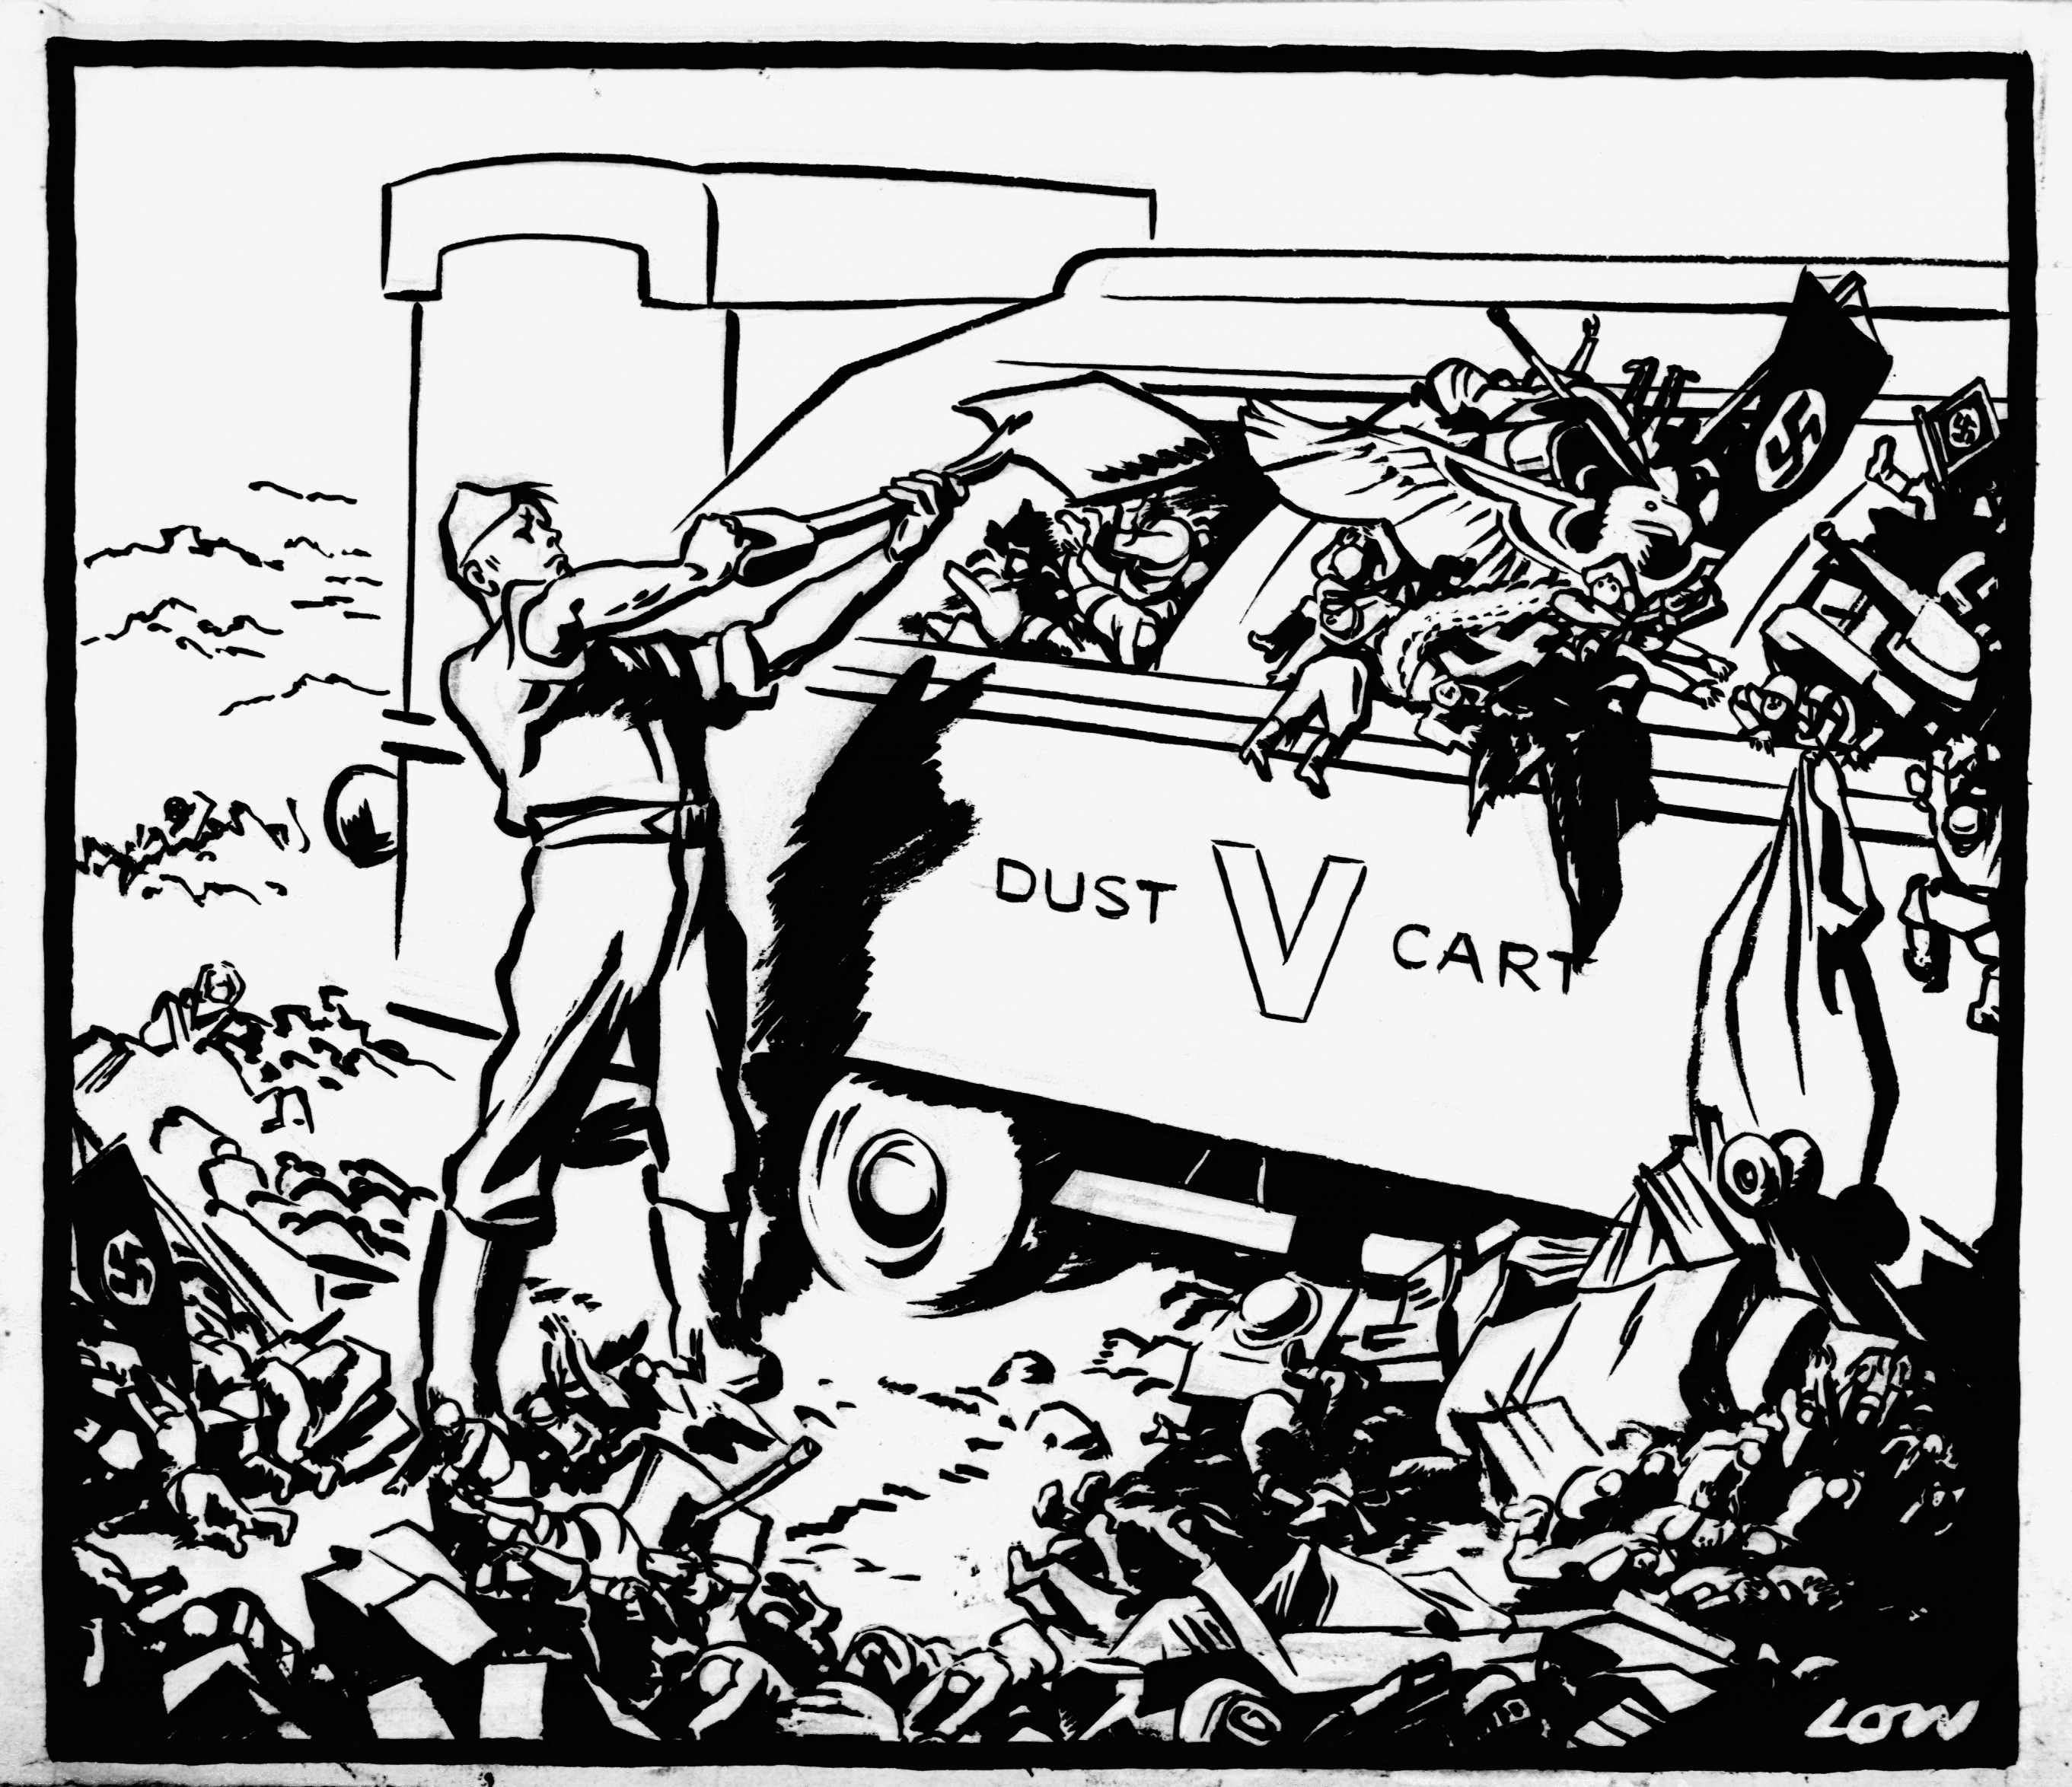 David Low, [no caption], Evening Standard, 7th May 1945 (DL2415)